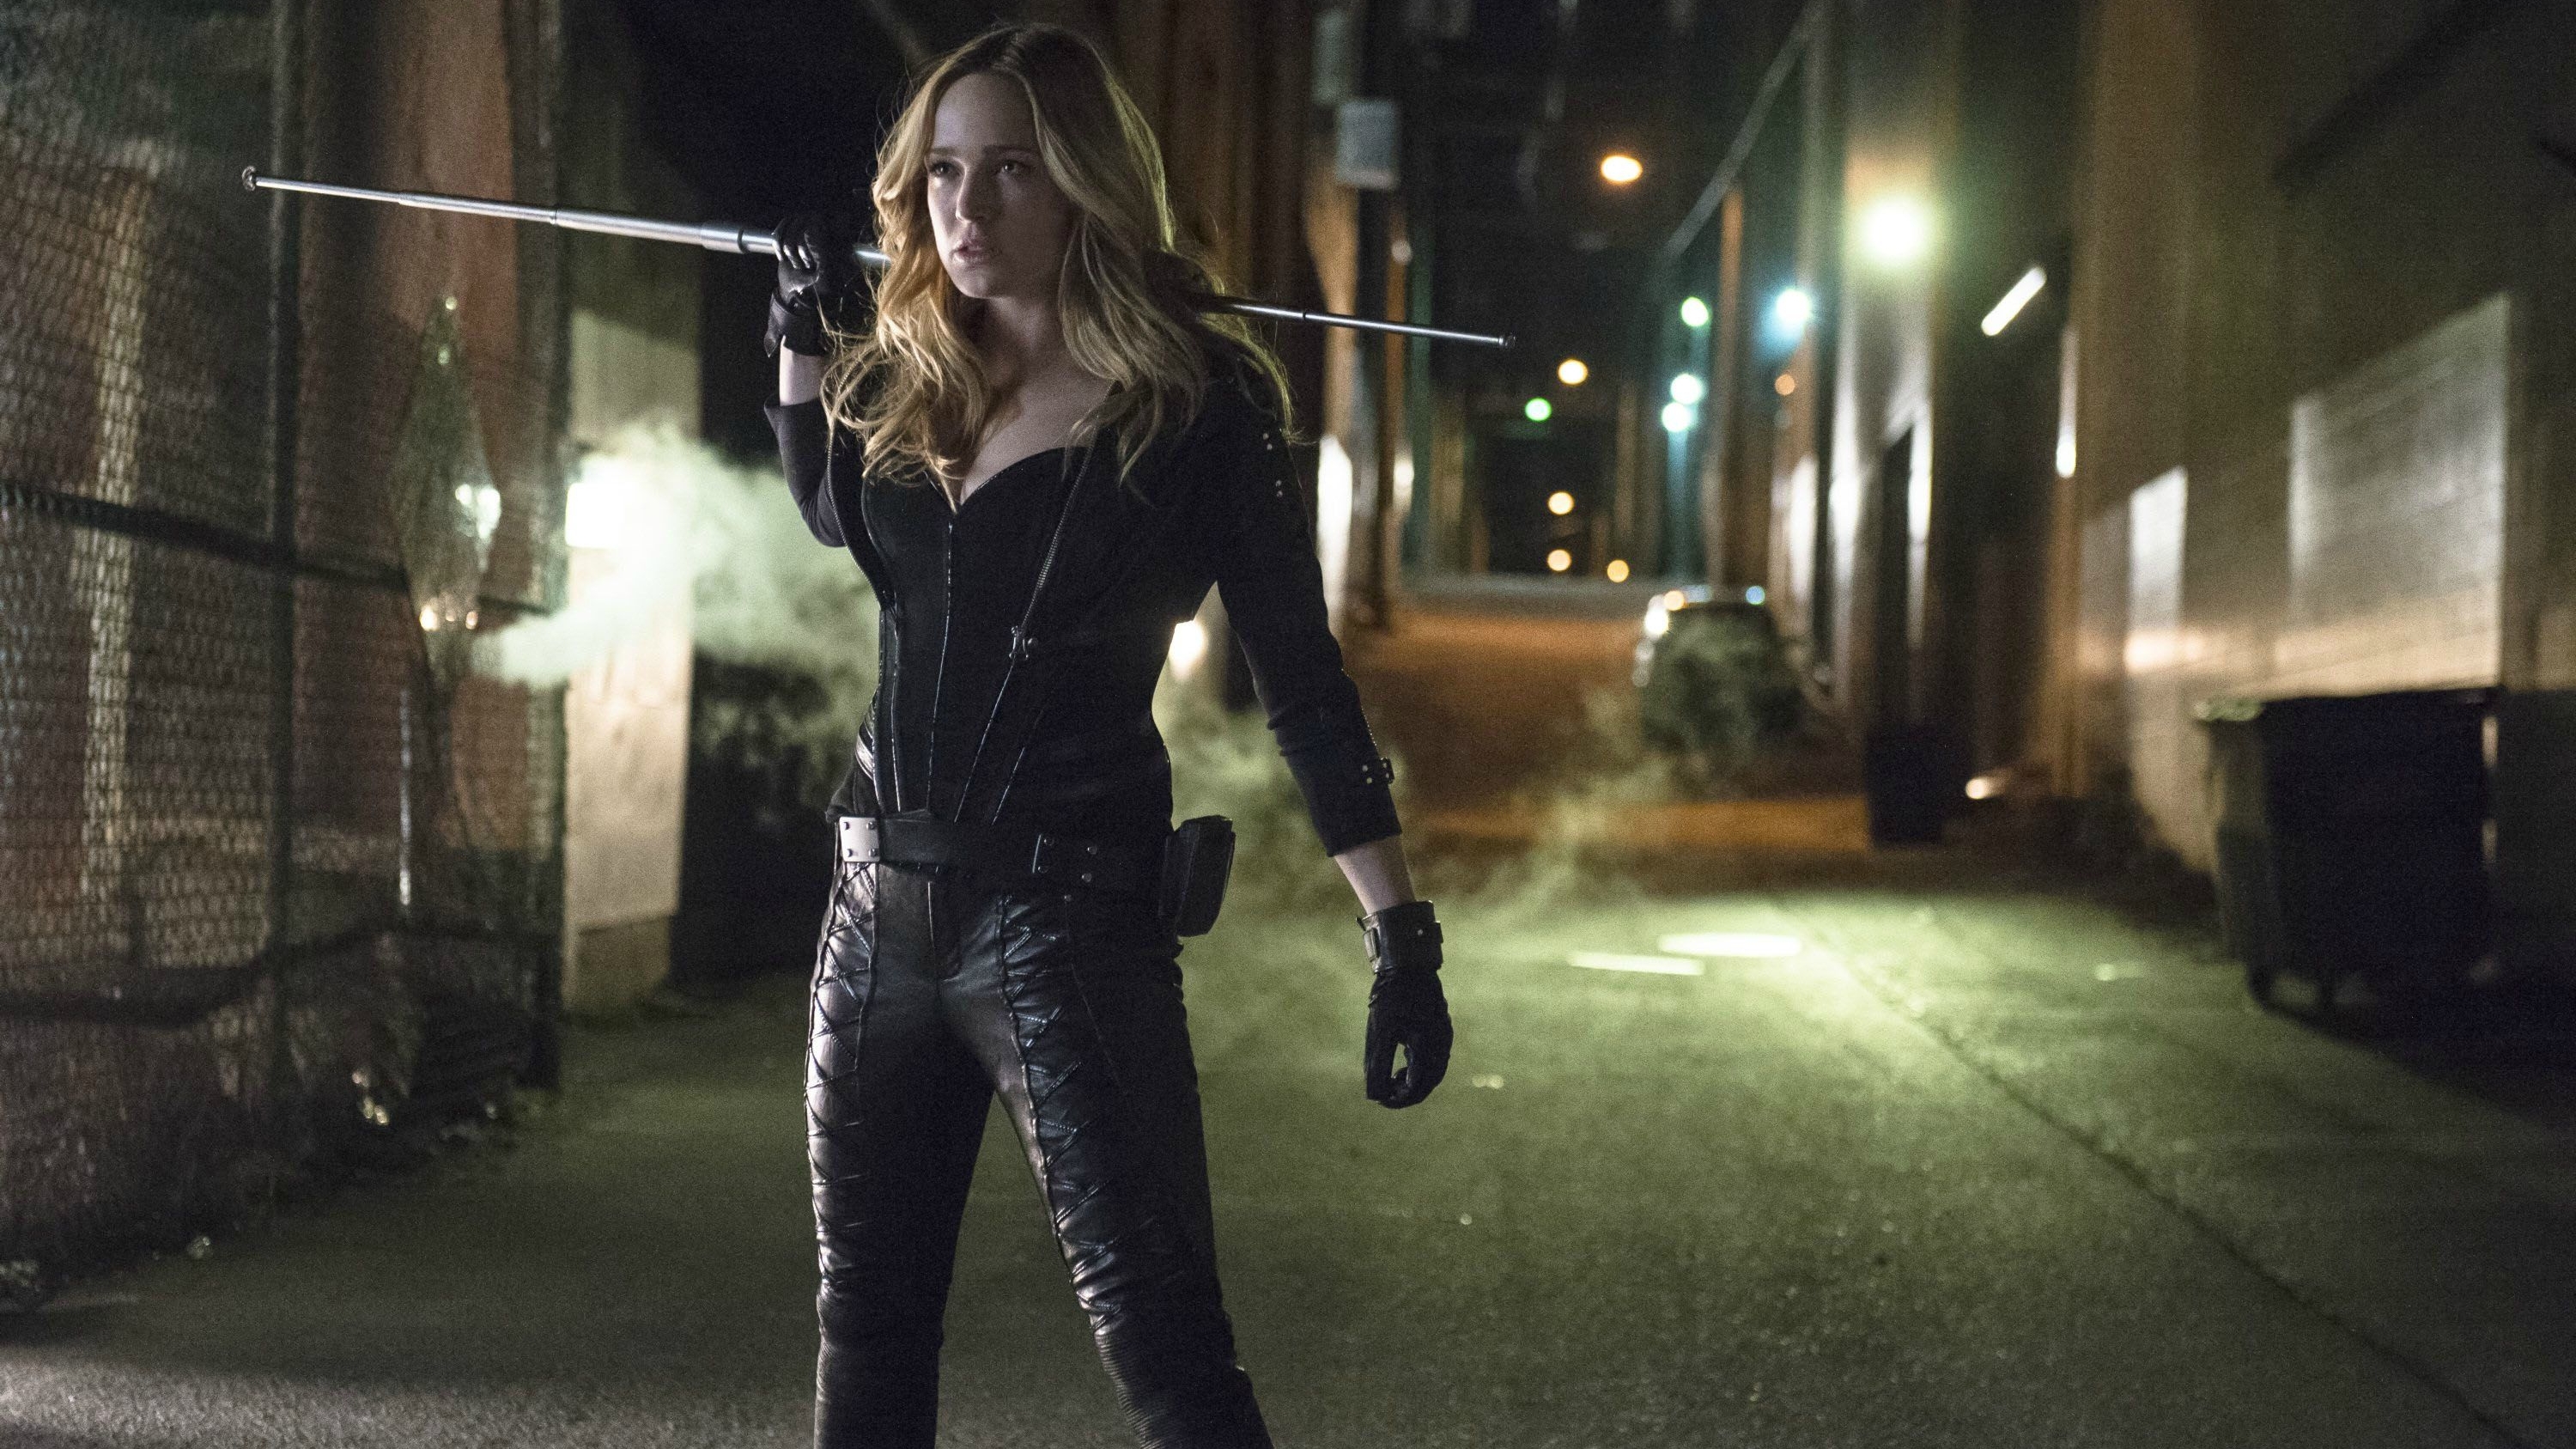 Caity Lotz Black Canary 3000x1687 Wallpaper Teahub Io Desktop pc, laptop, mac, iphone, ipad, android mobiles, tablets privacy policy | terms of. caity lotz black canary 3000x1687